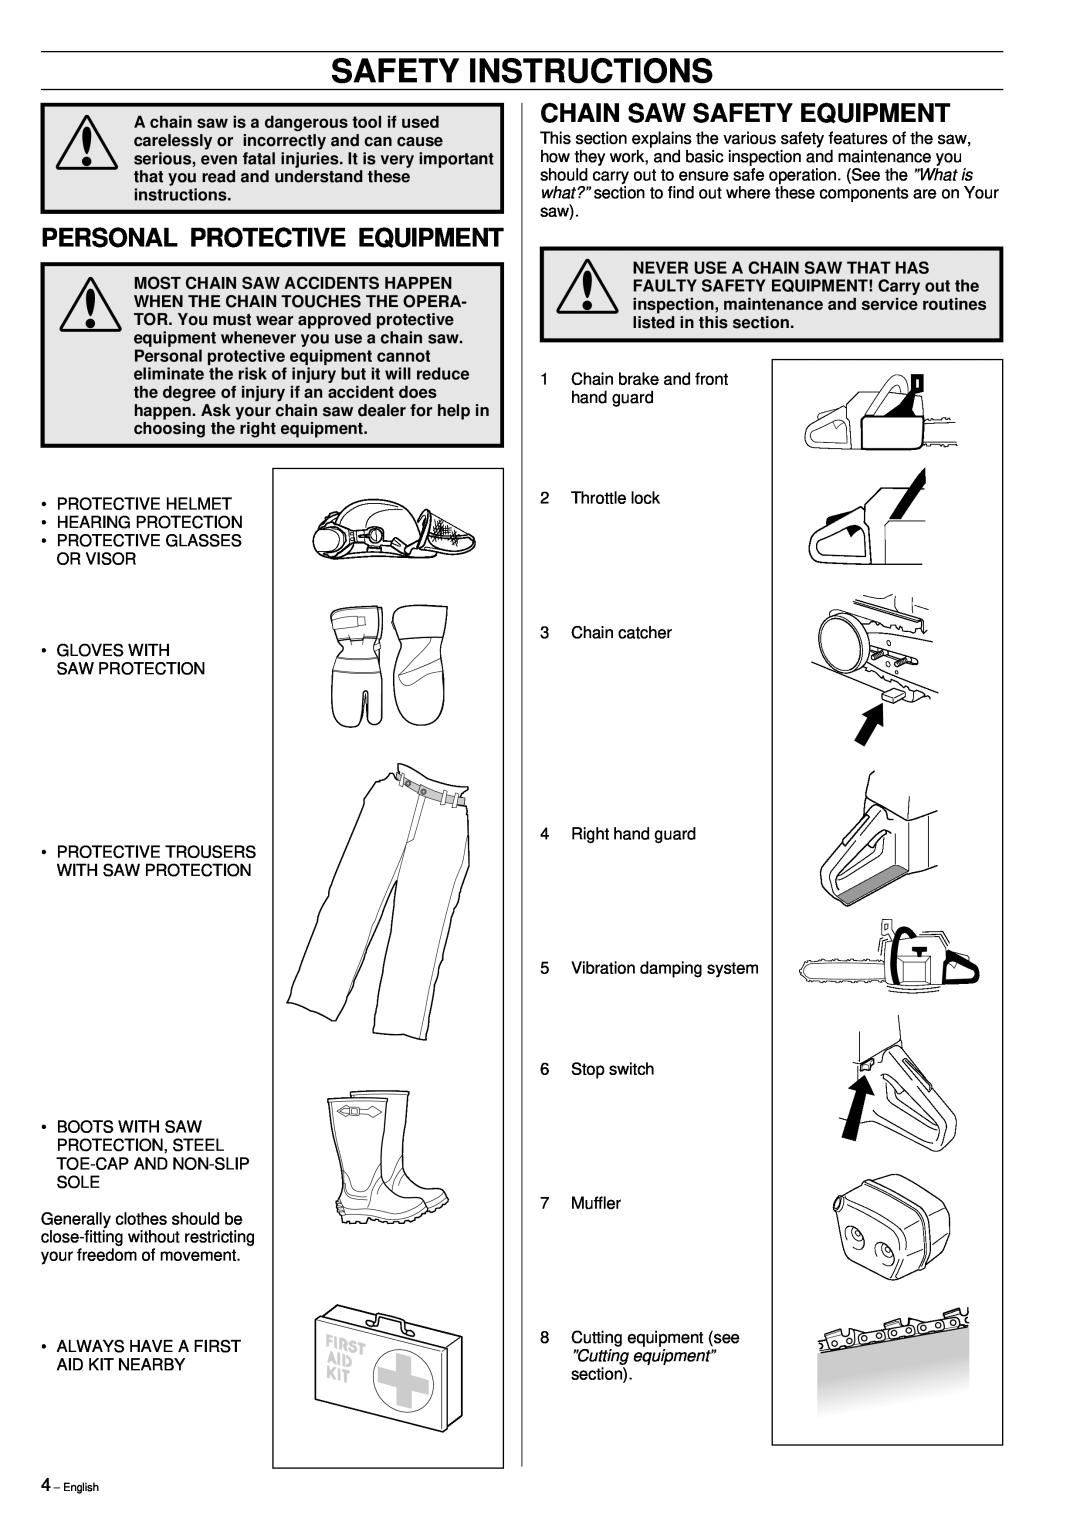 Husqvarna 51 manual Safety Instructions, Personal Protective Equipment, Chain Saw Safety Equipment 